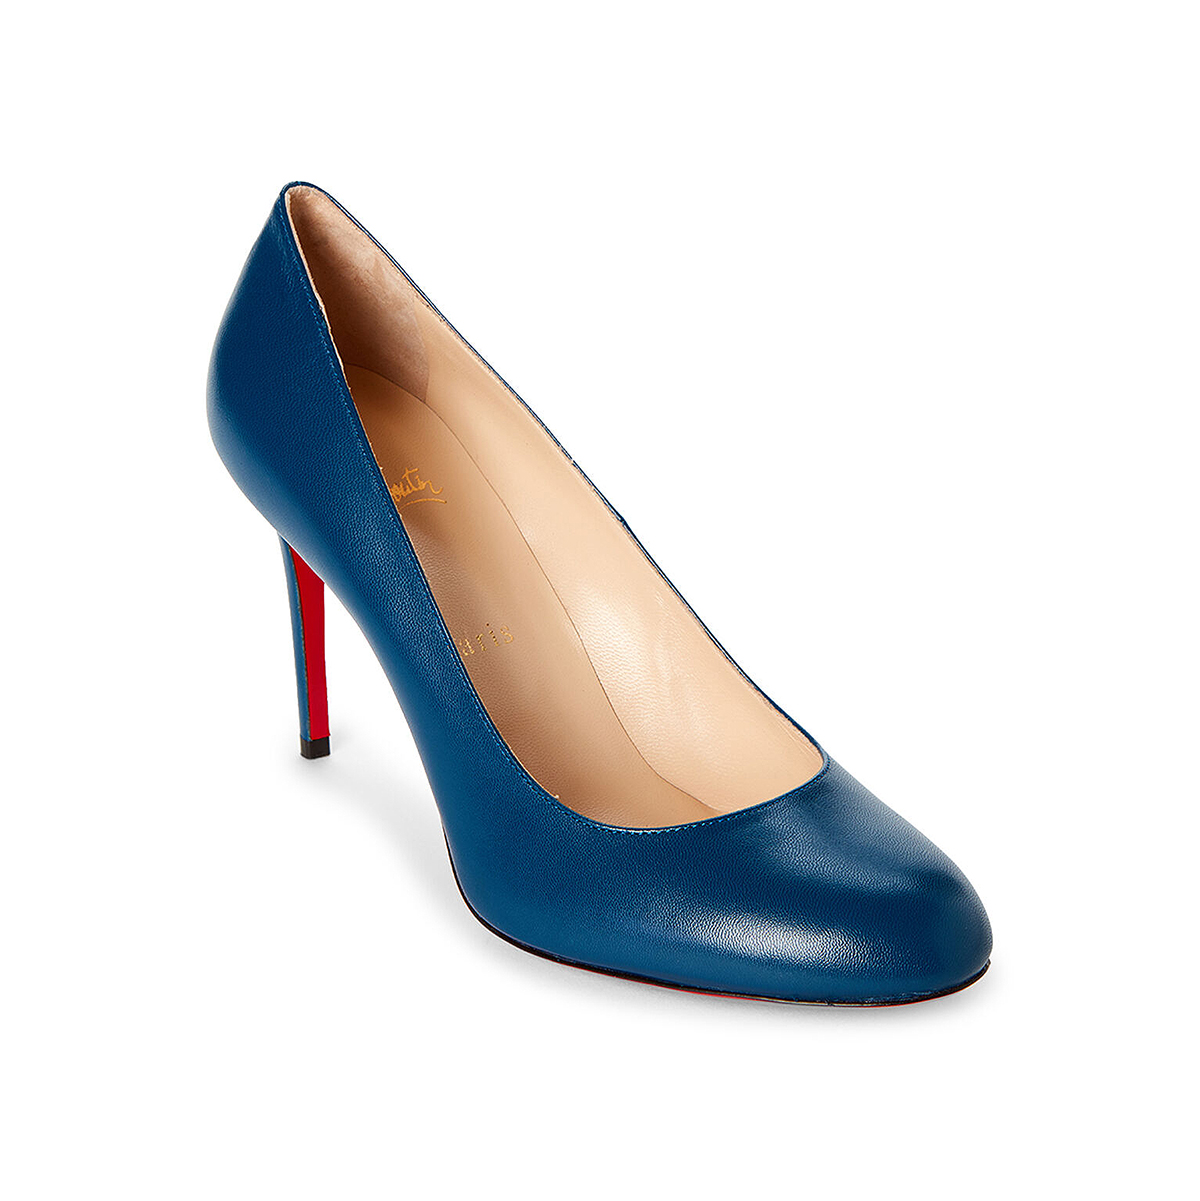 We Found Louboutin Heels Over 40% Off for Black Friday 2019!